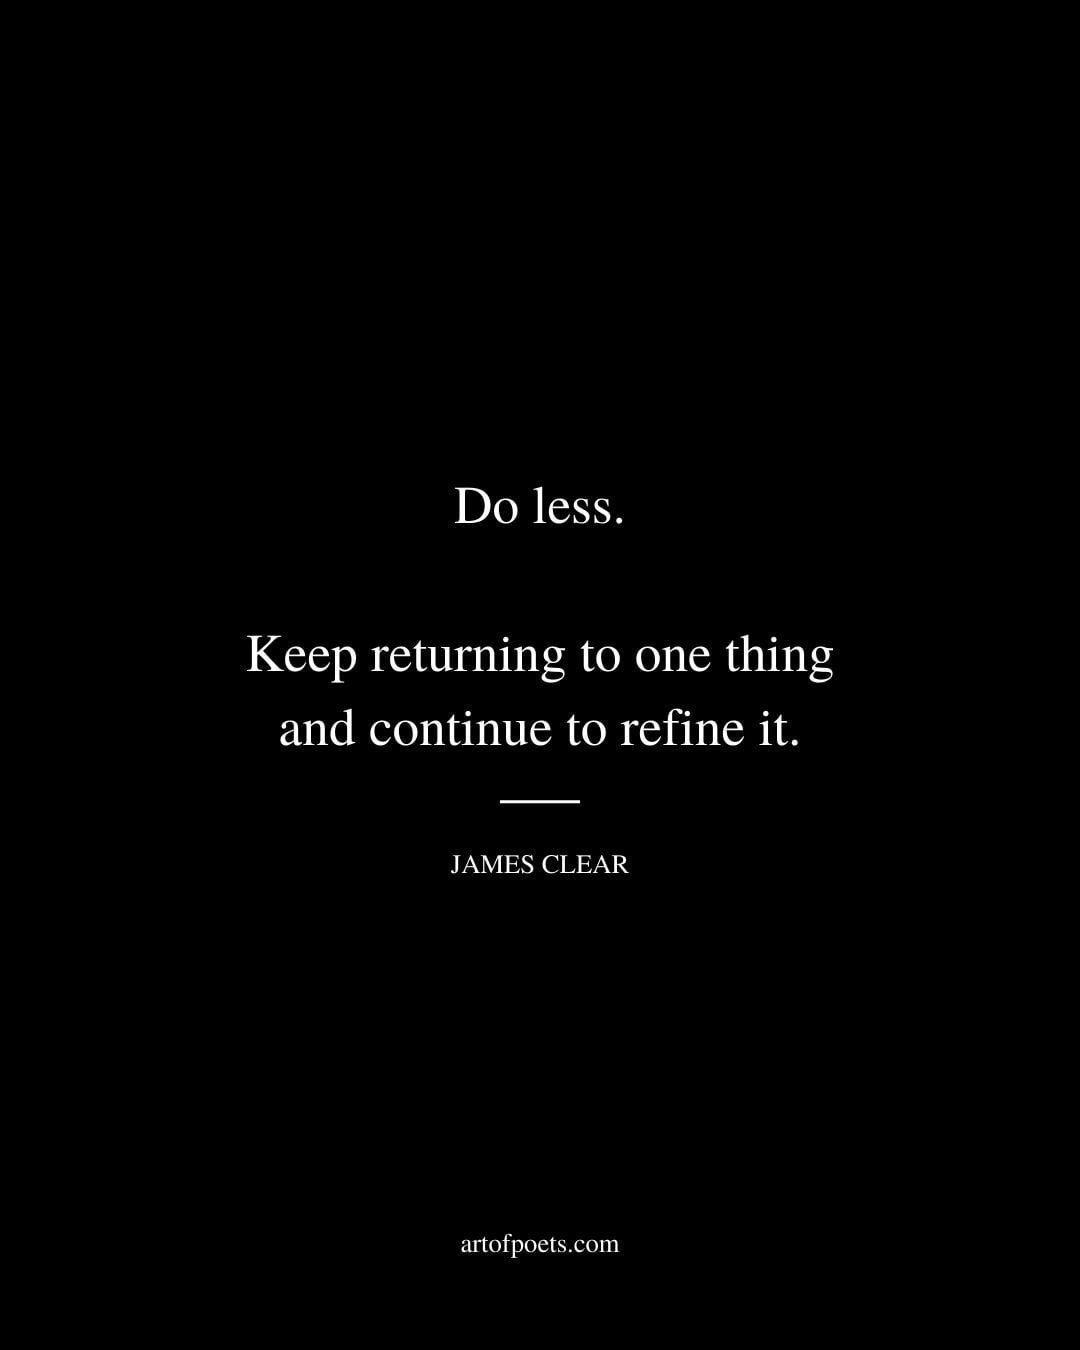 Do less. Keep returning to one thing and continue to refine it